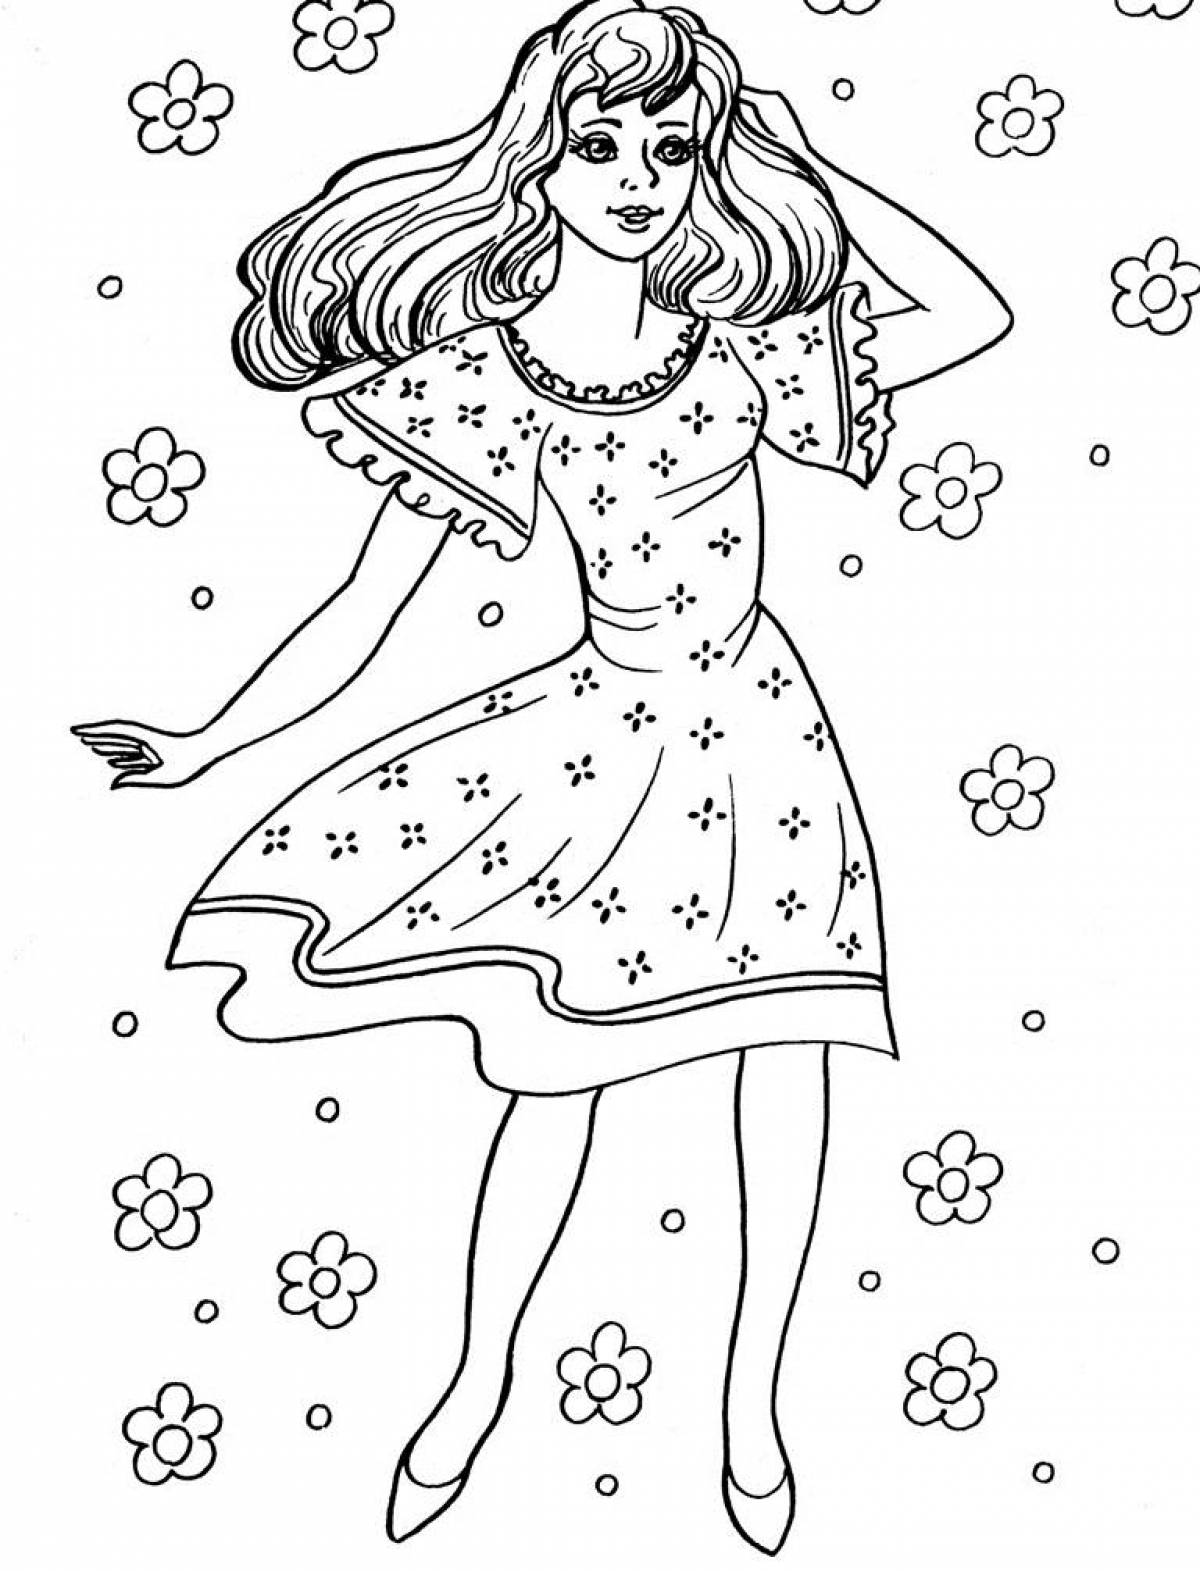 Adorable coloring book for girls 8-9 years old